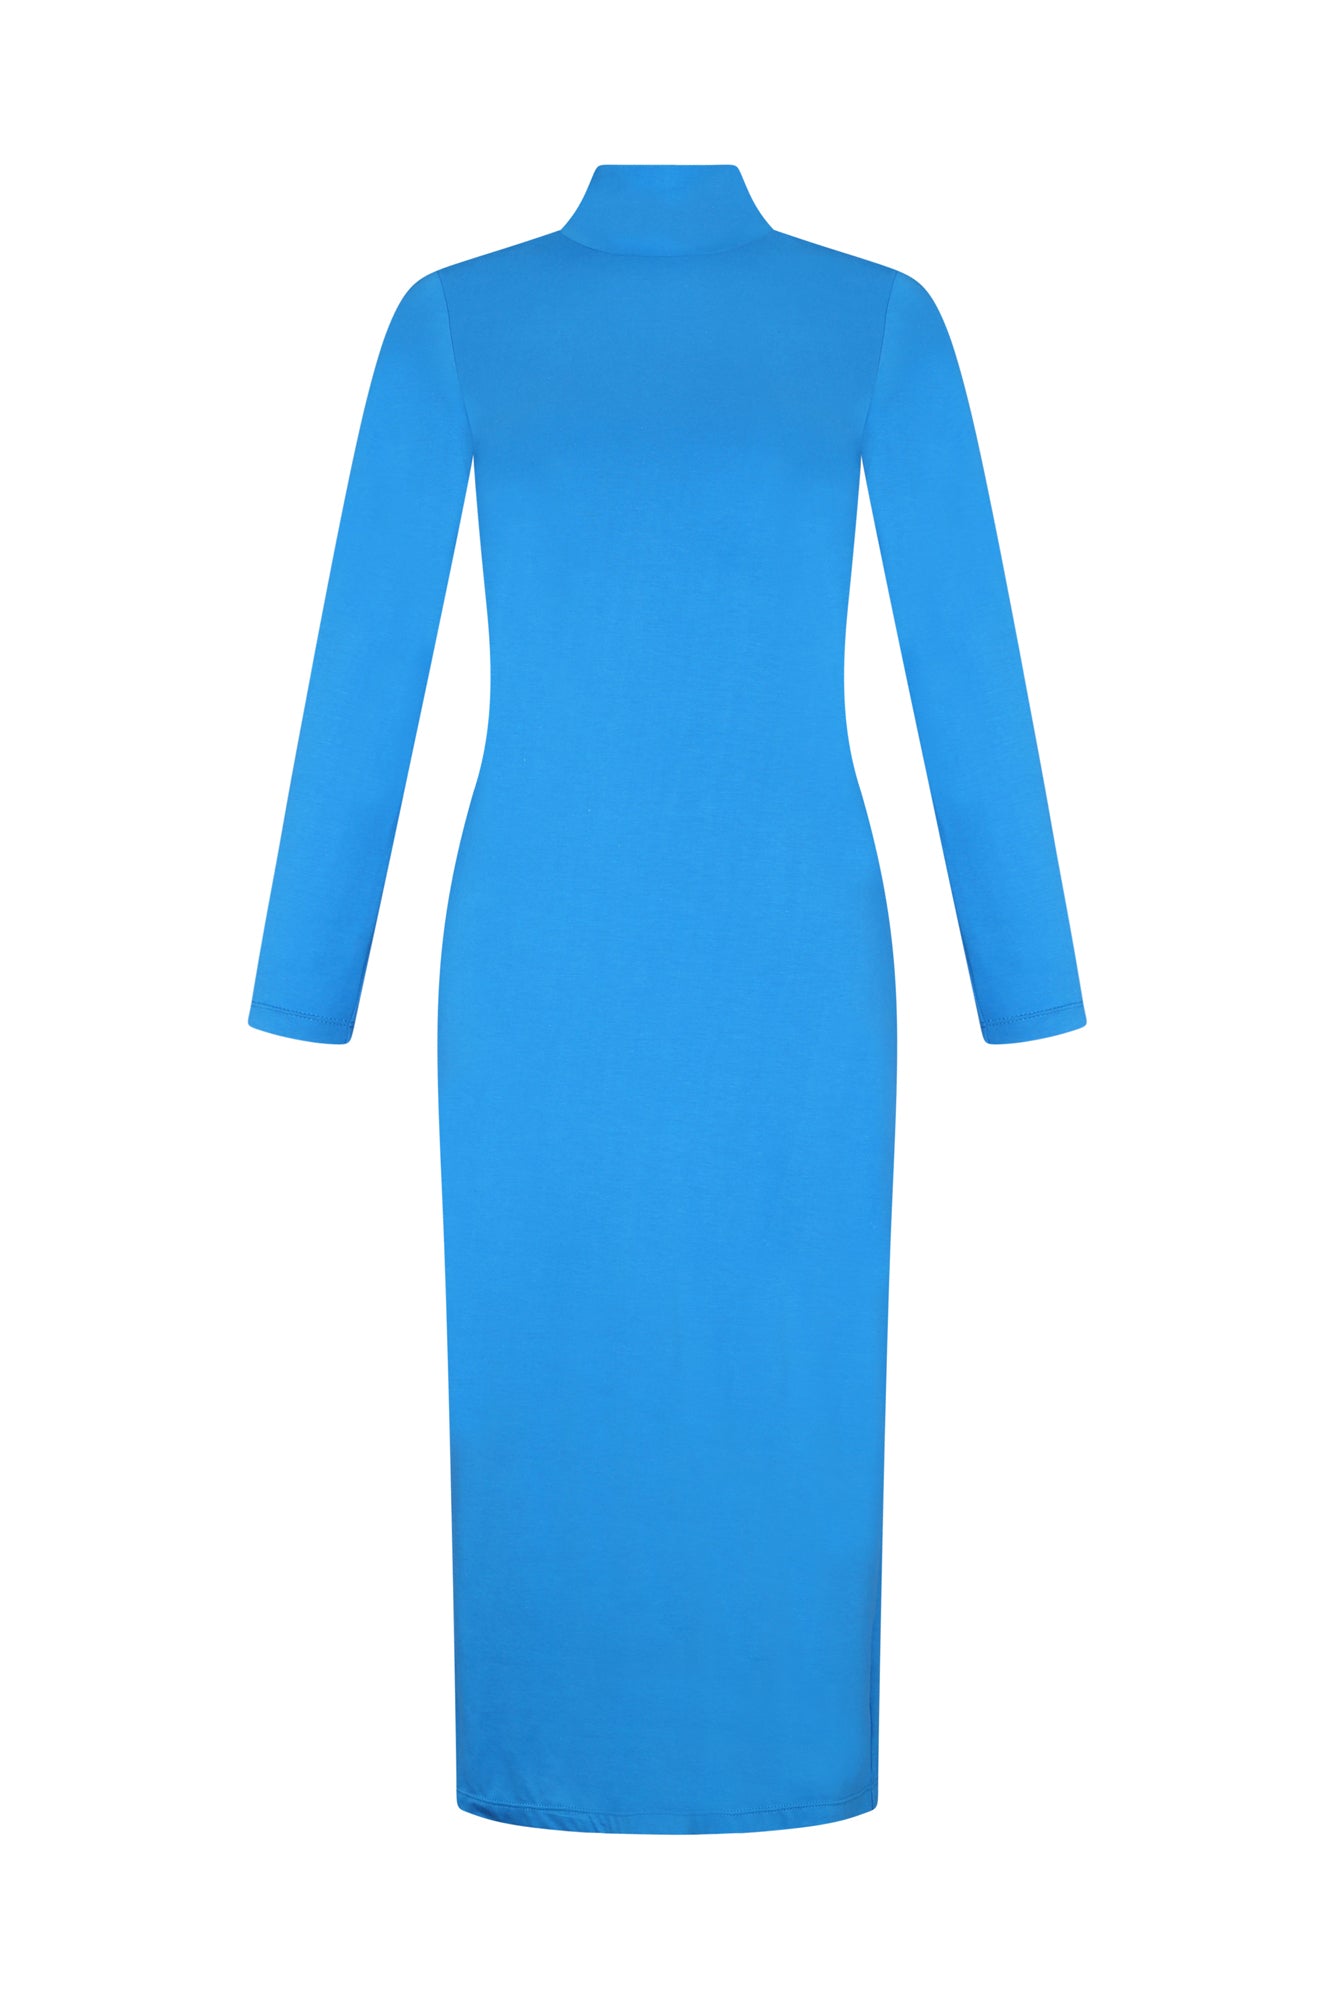 Anis Dress in Solid Royal Blue